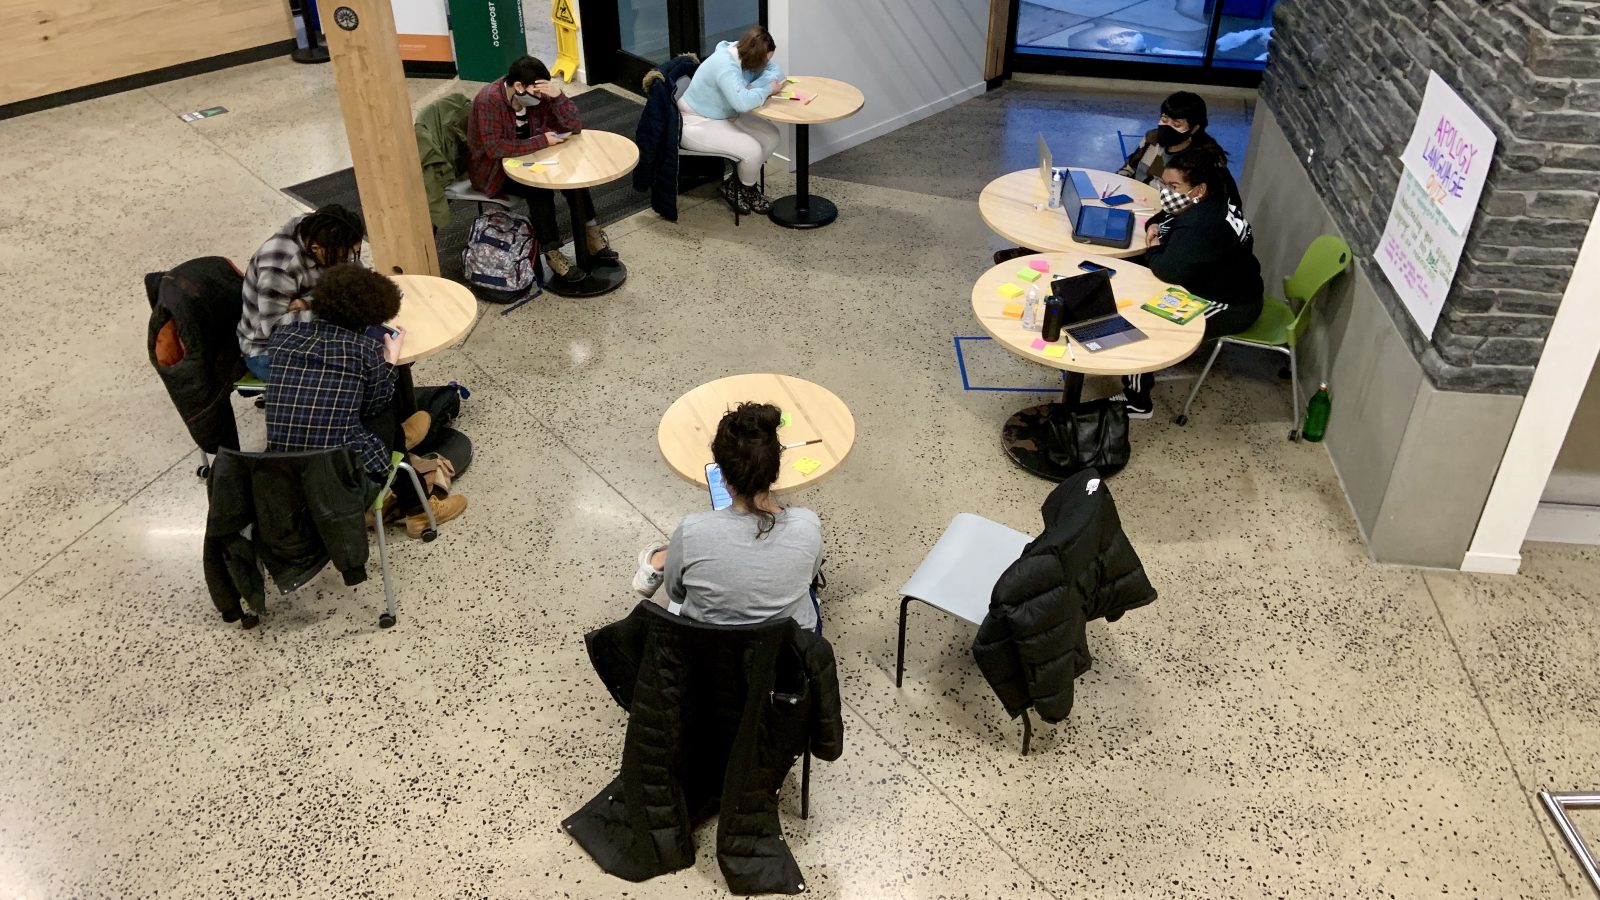 A high view looking down on students sitting at different tables looking at their phones and laptops